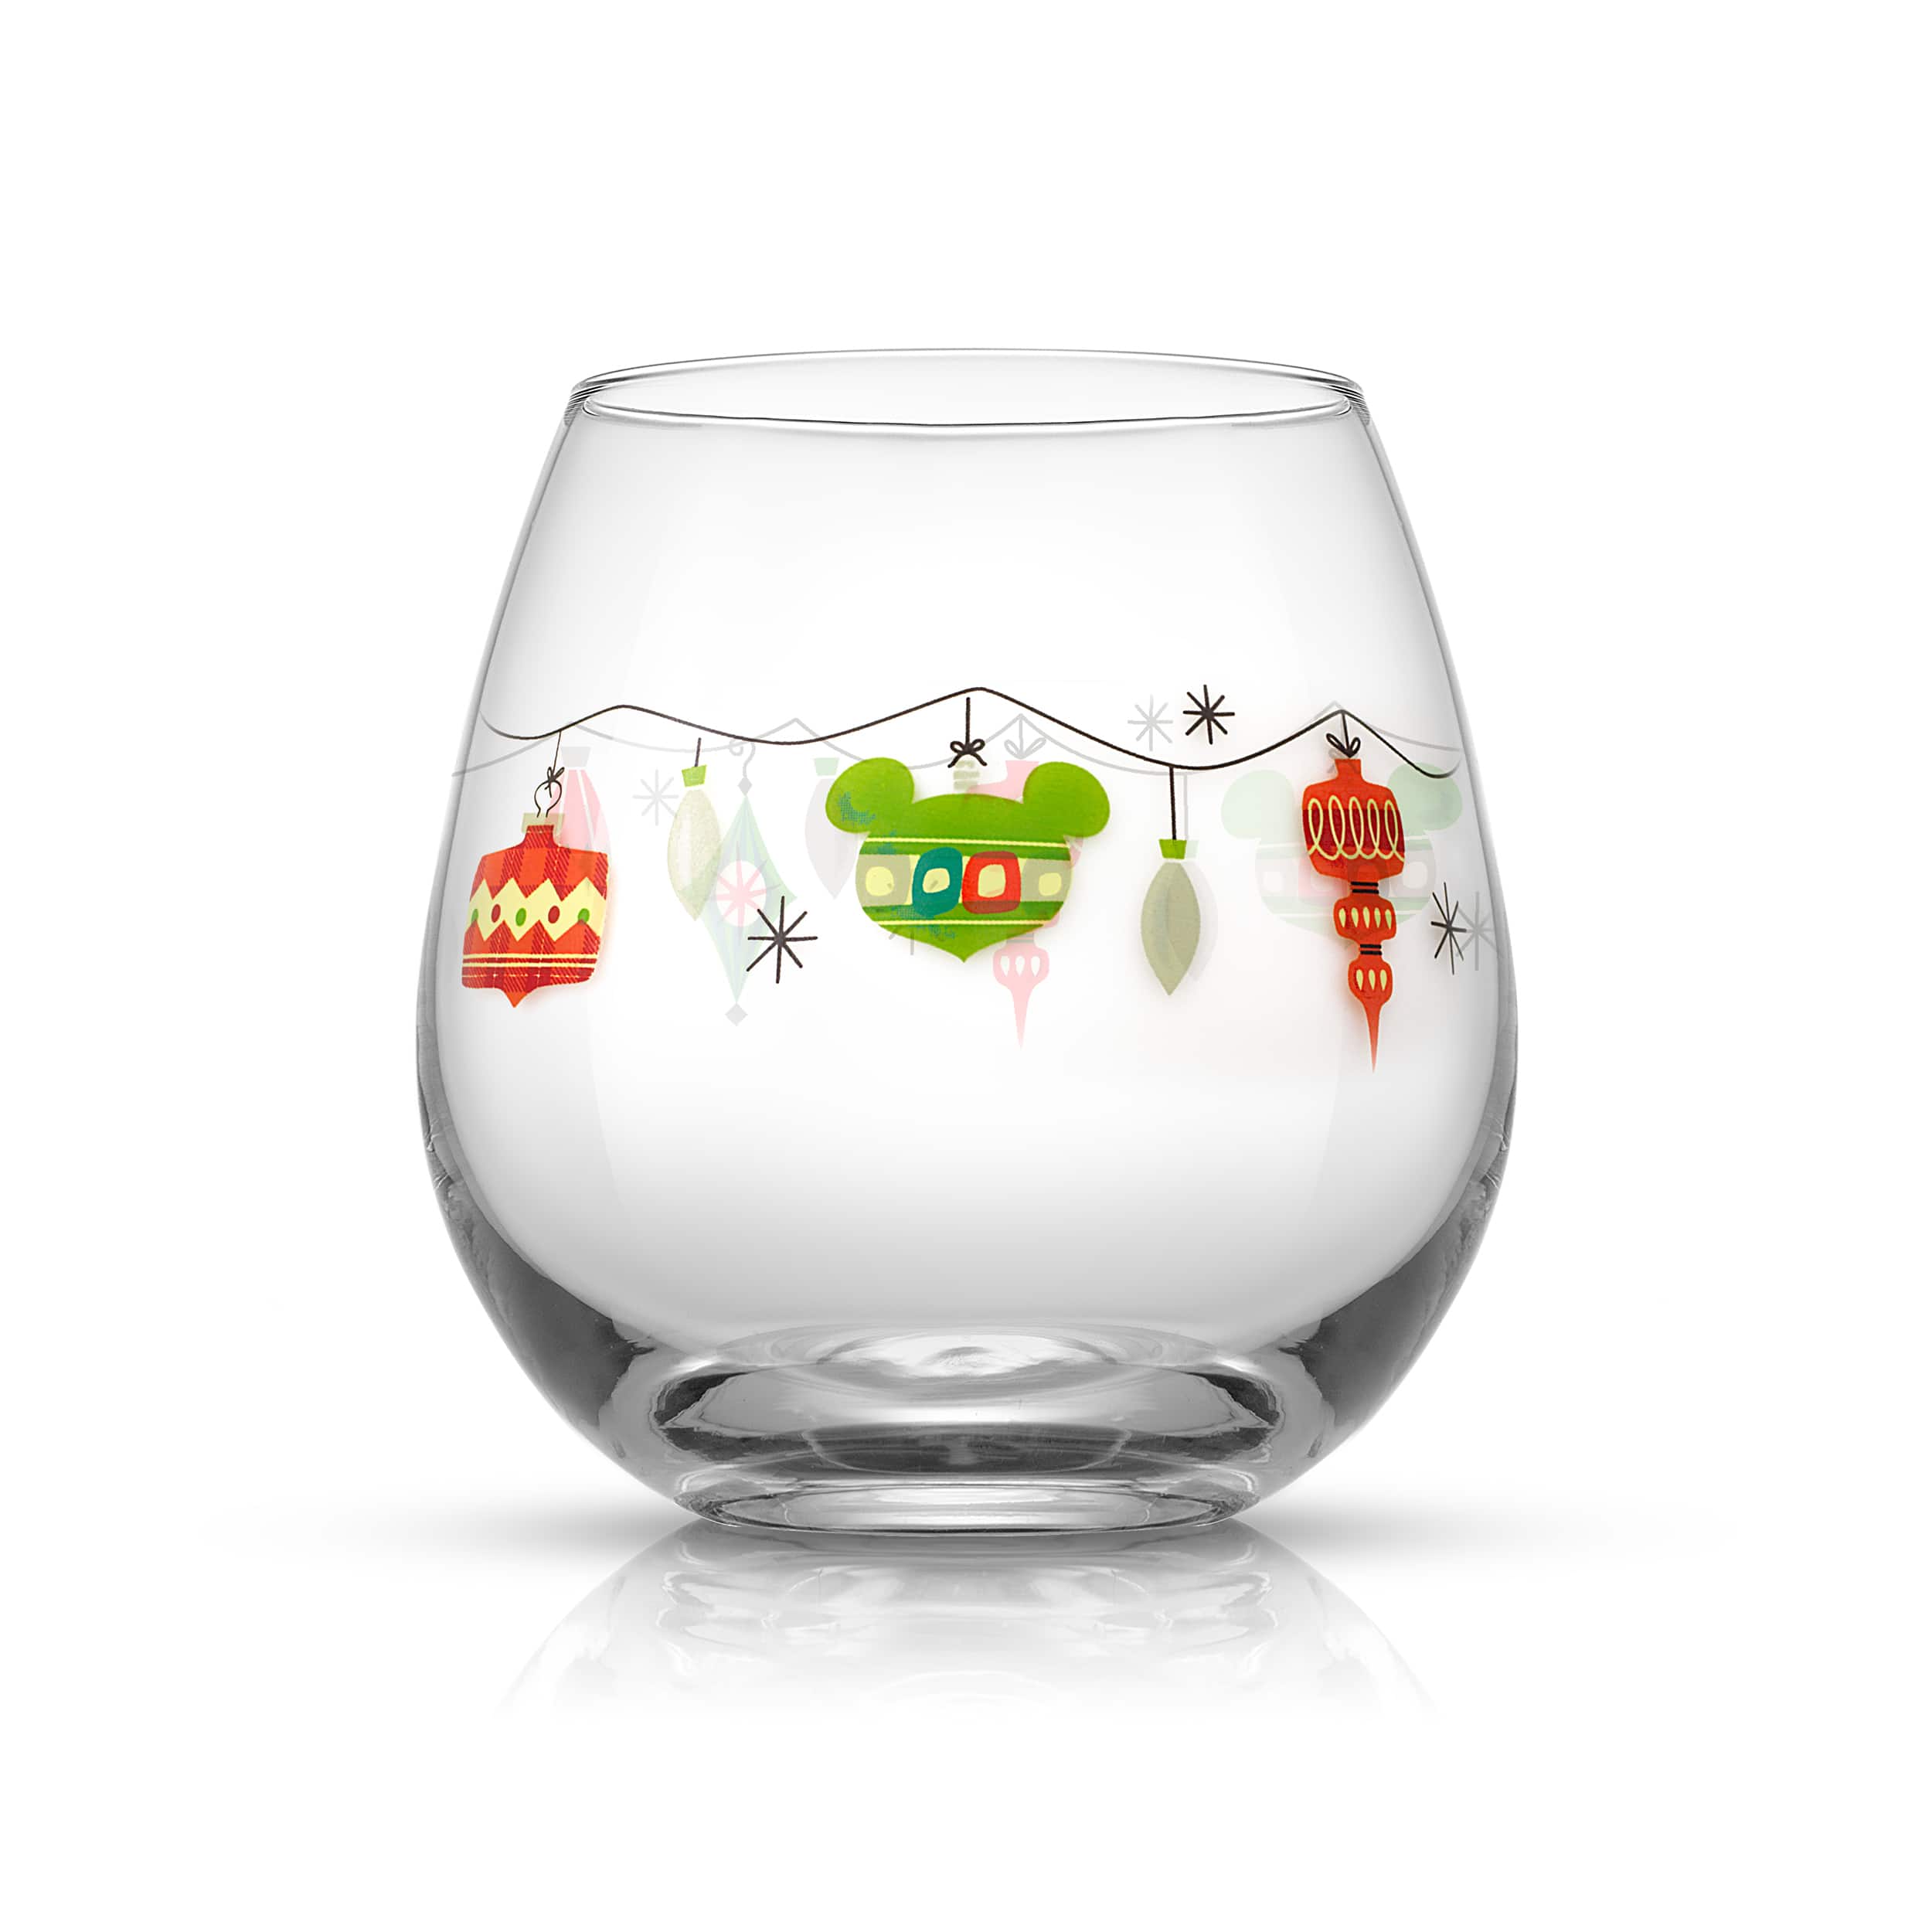 Disney Mickey Mouse Constructive Stemless Glasses, Set of 4 - Clear